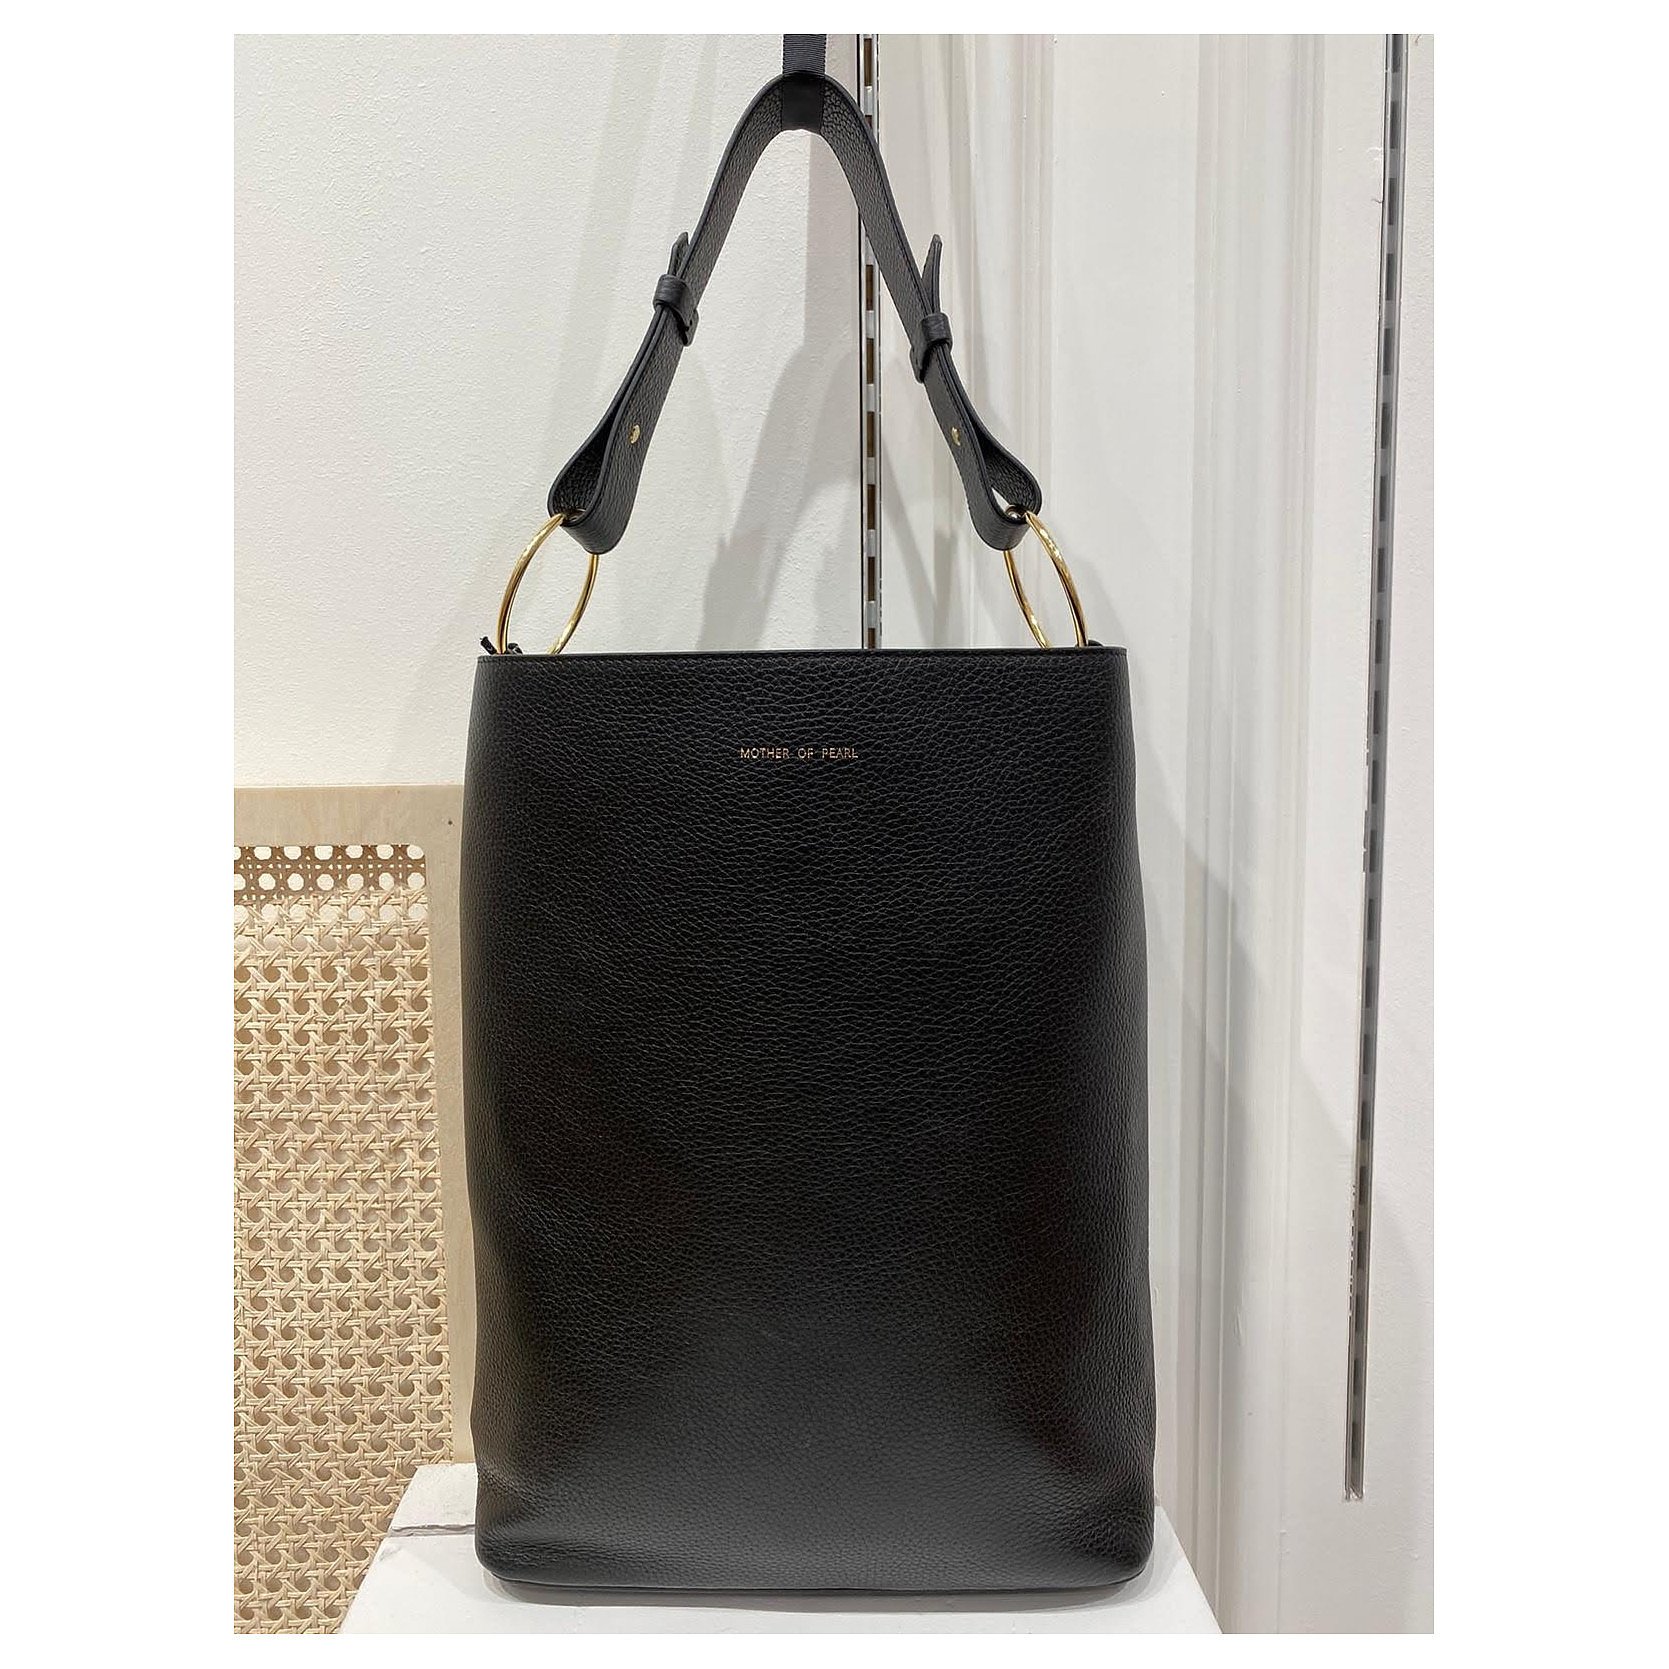 Mother of Pearl Pebbled Leather Tote Bag